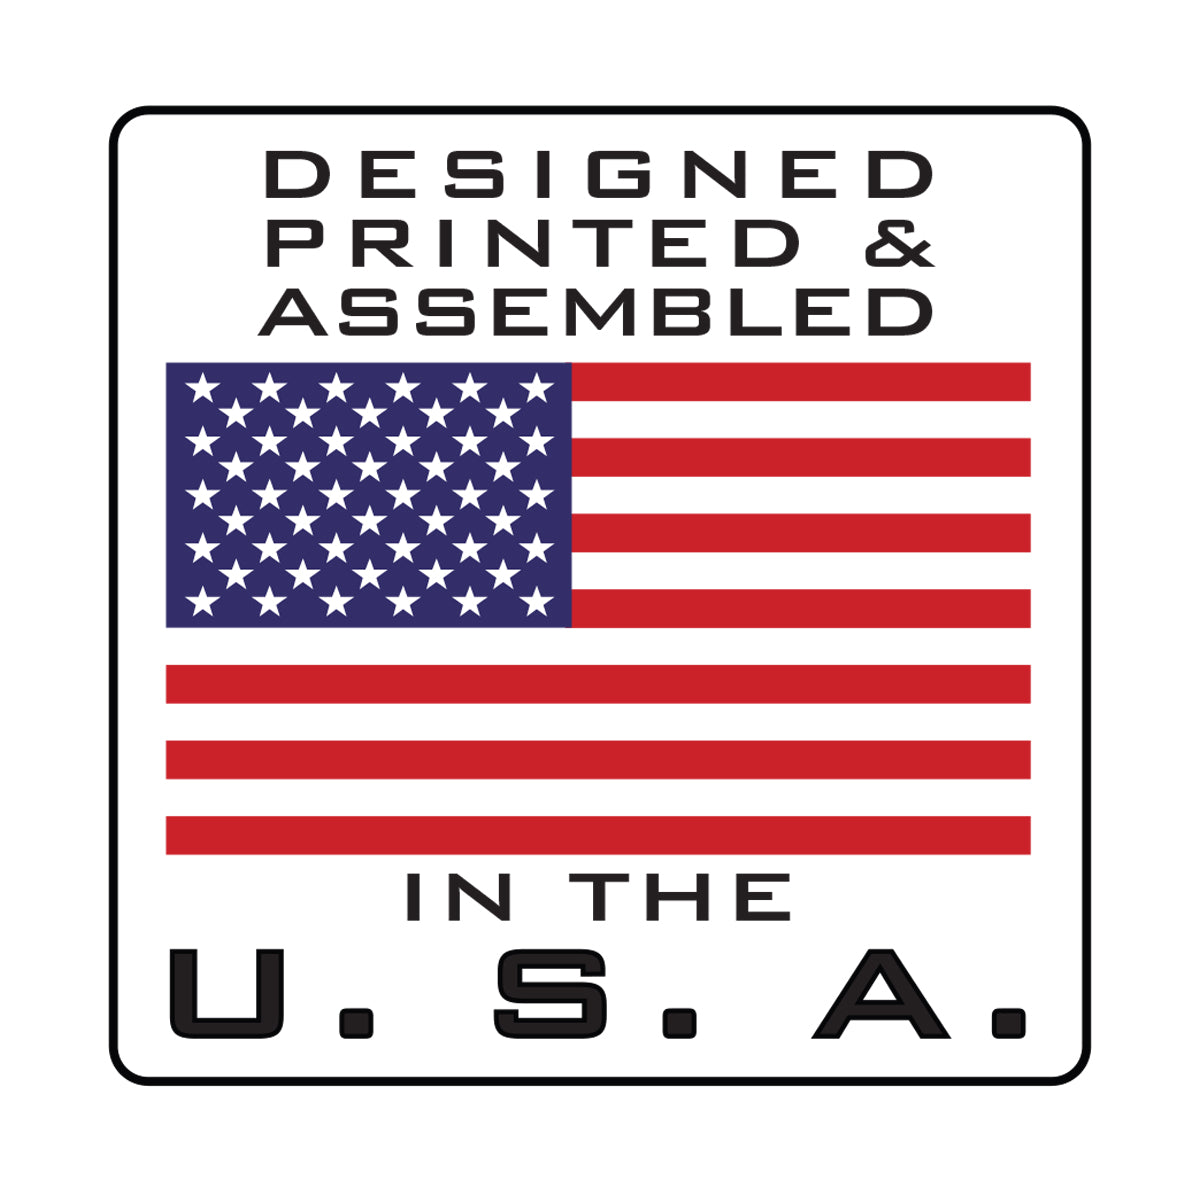 A graphic with the text "Designed, Printed & Assembled in the U.S.A." above and below an illustration of the American flag, ideal for Oversized Custom Printed Horizontal XL Badge Buddy (Extra Large Size) recognition.